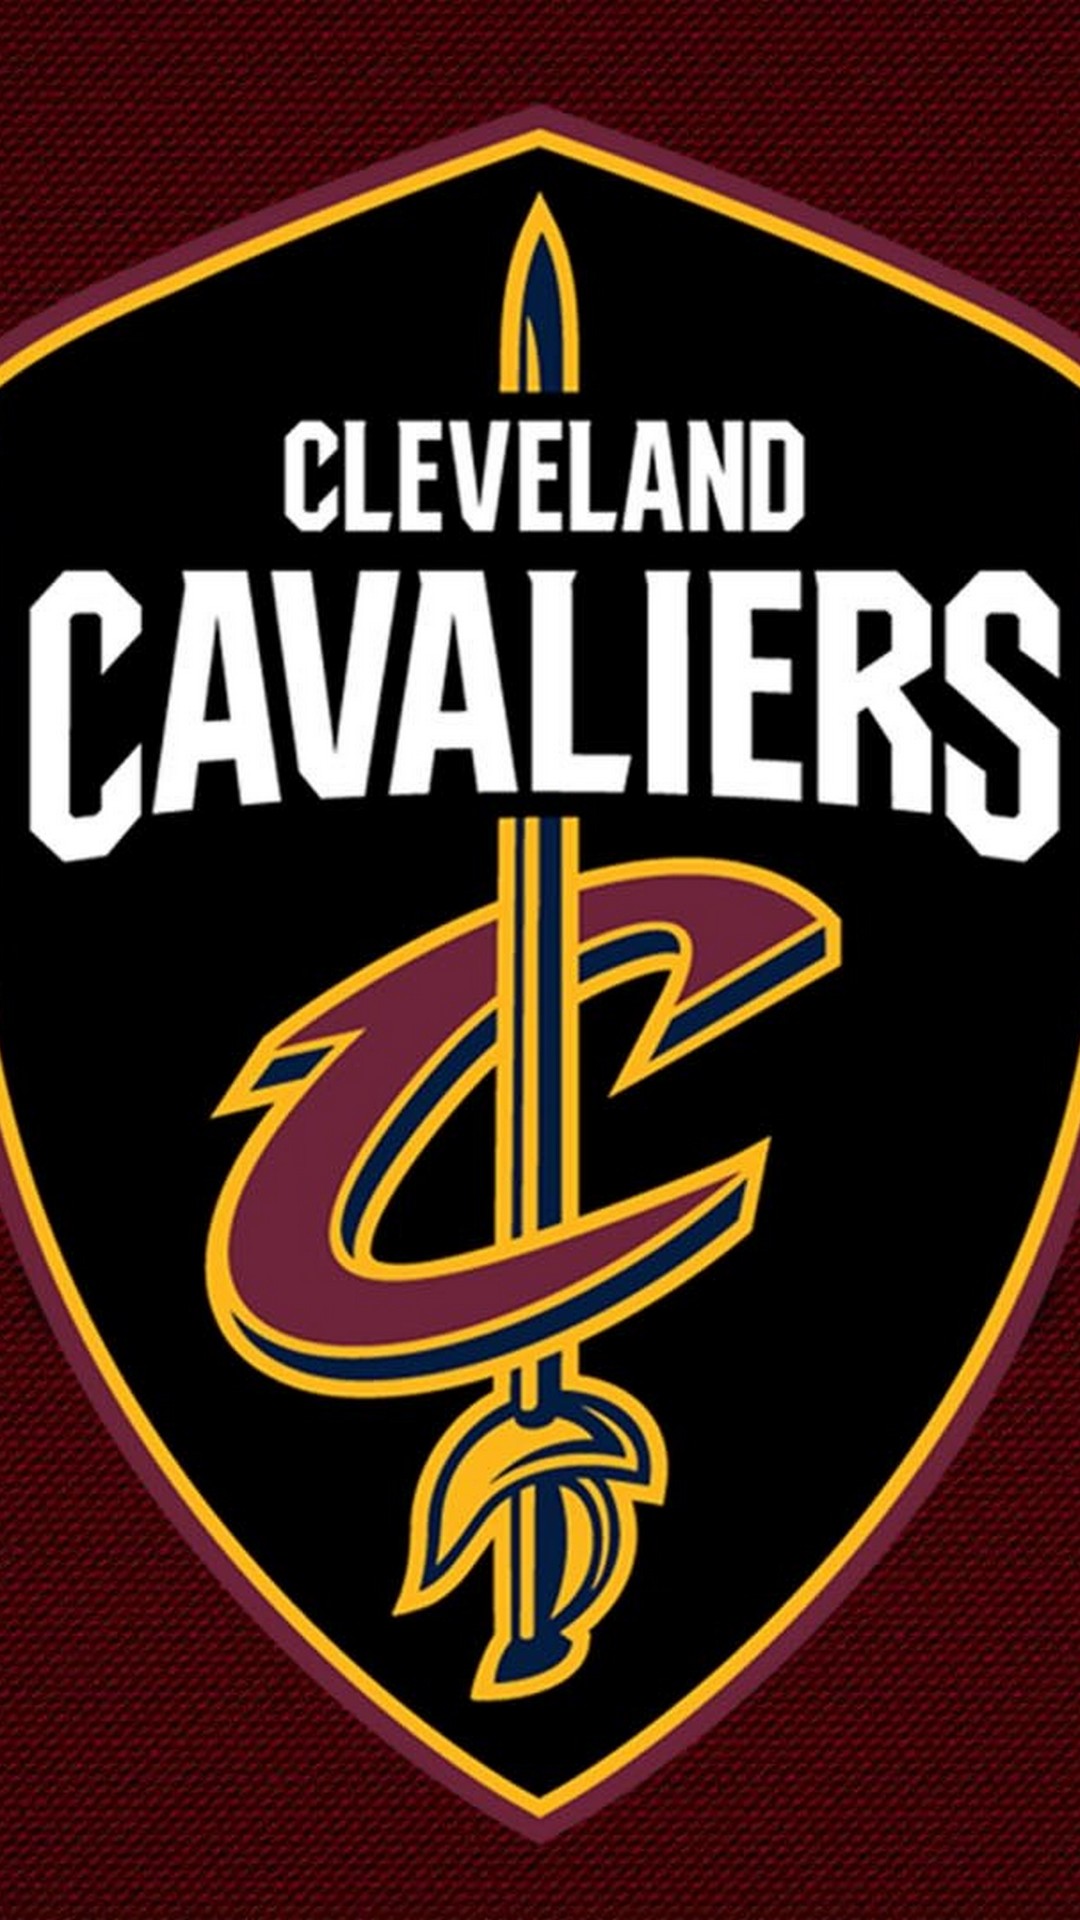 Cleveland Cavaliers NBA iPhone Wallpapers 1080x1920